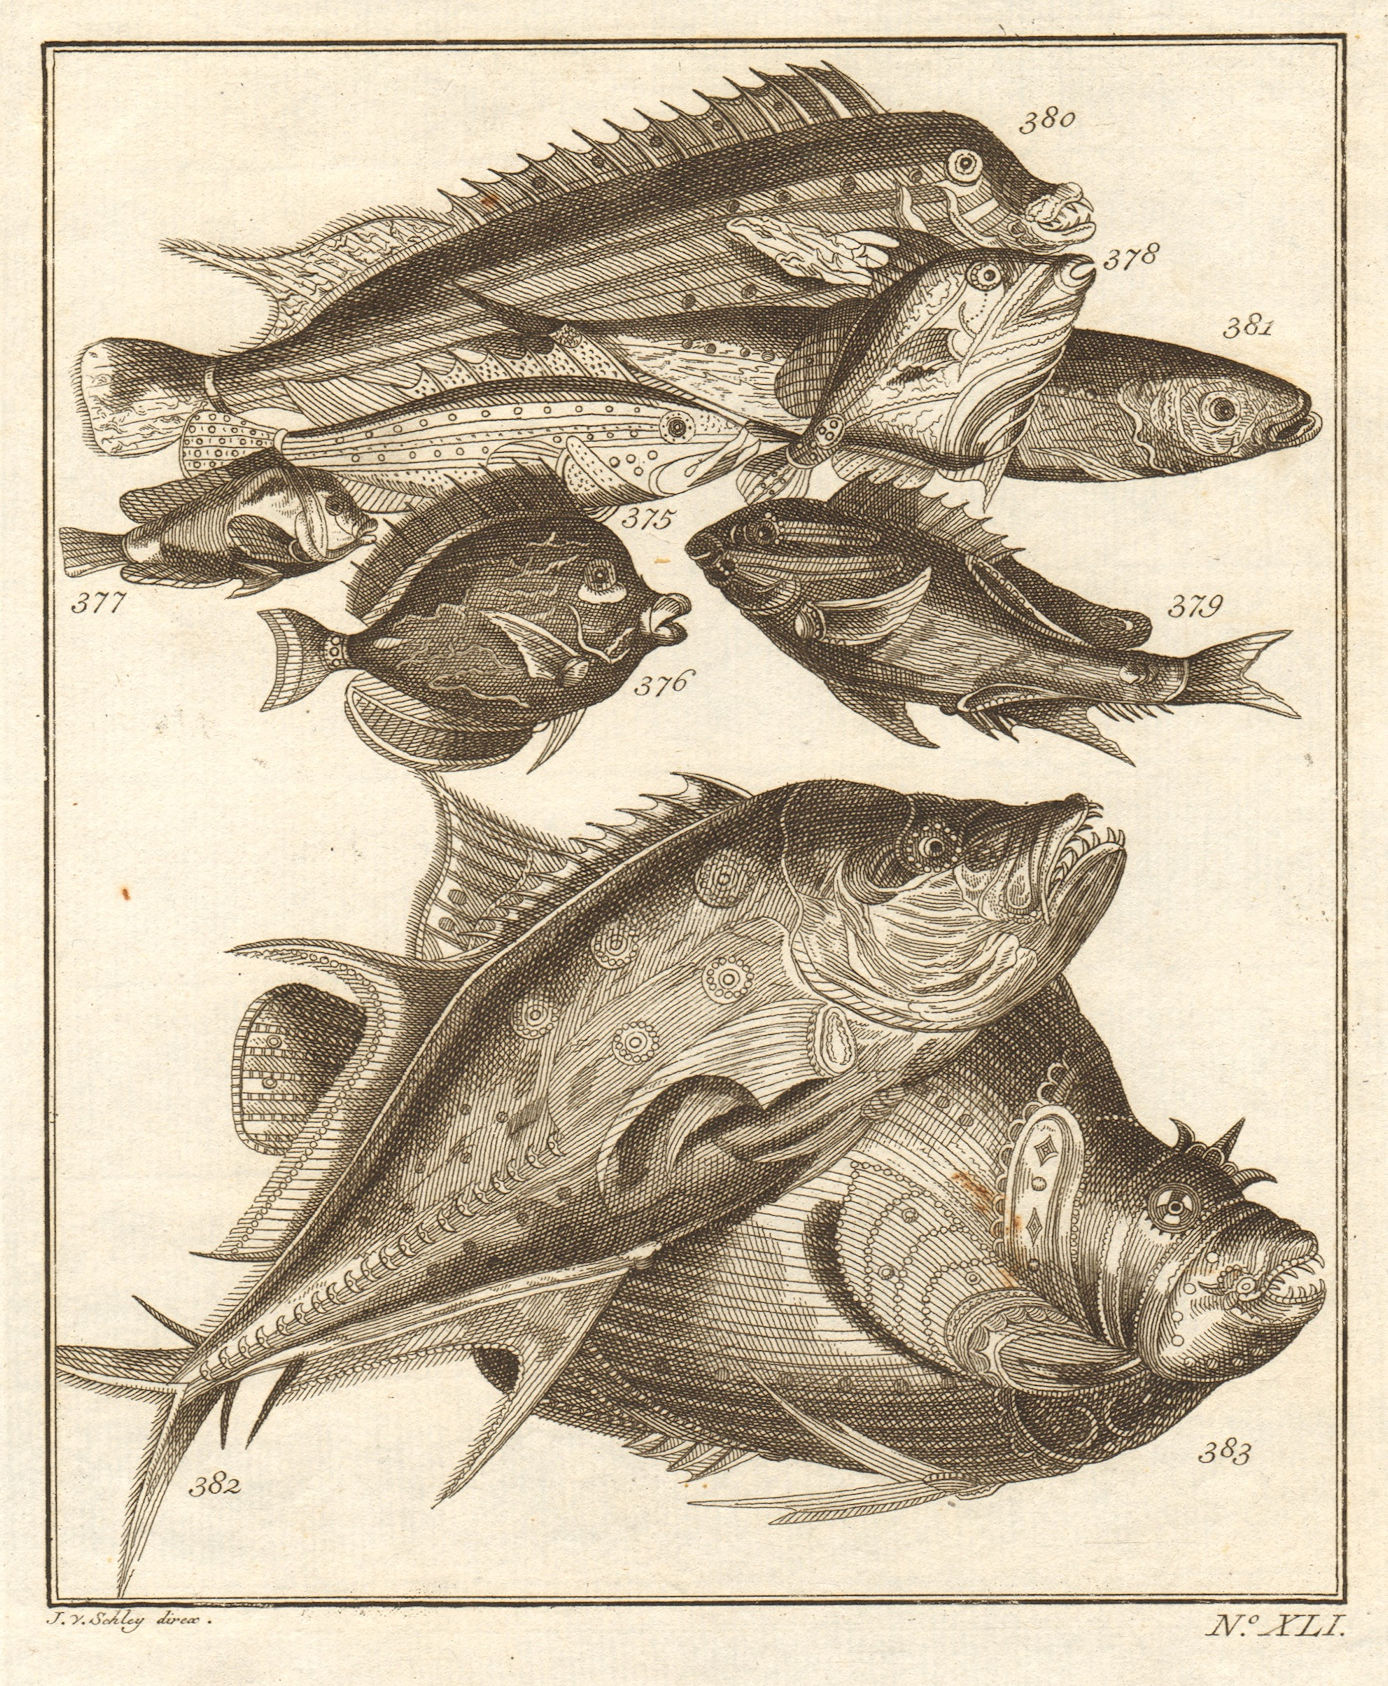 Associate Product XLI. Poissons d'Ambione. Indonesia Moluccas Maluku tropical fish. SCHLEY 1763